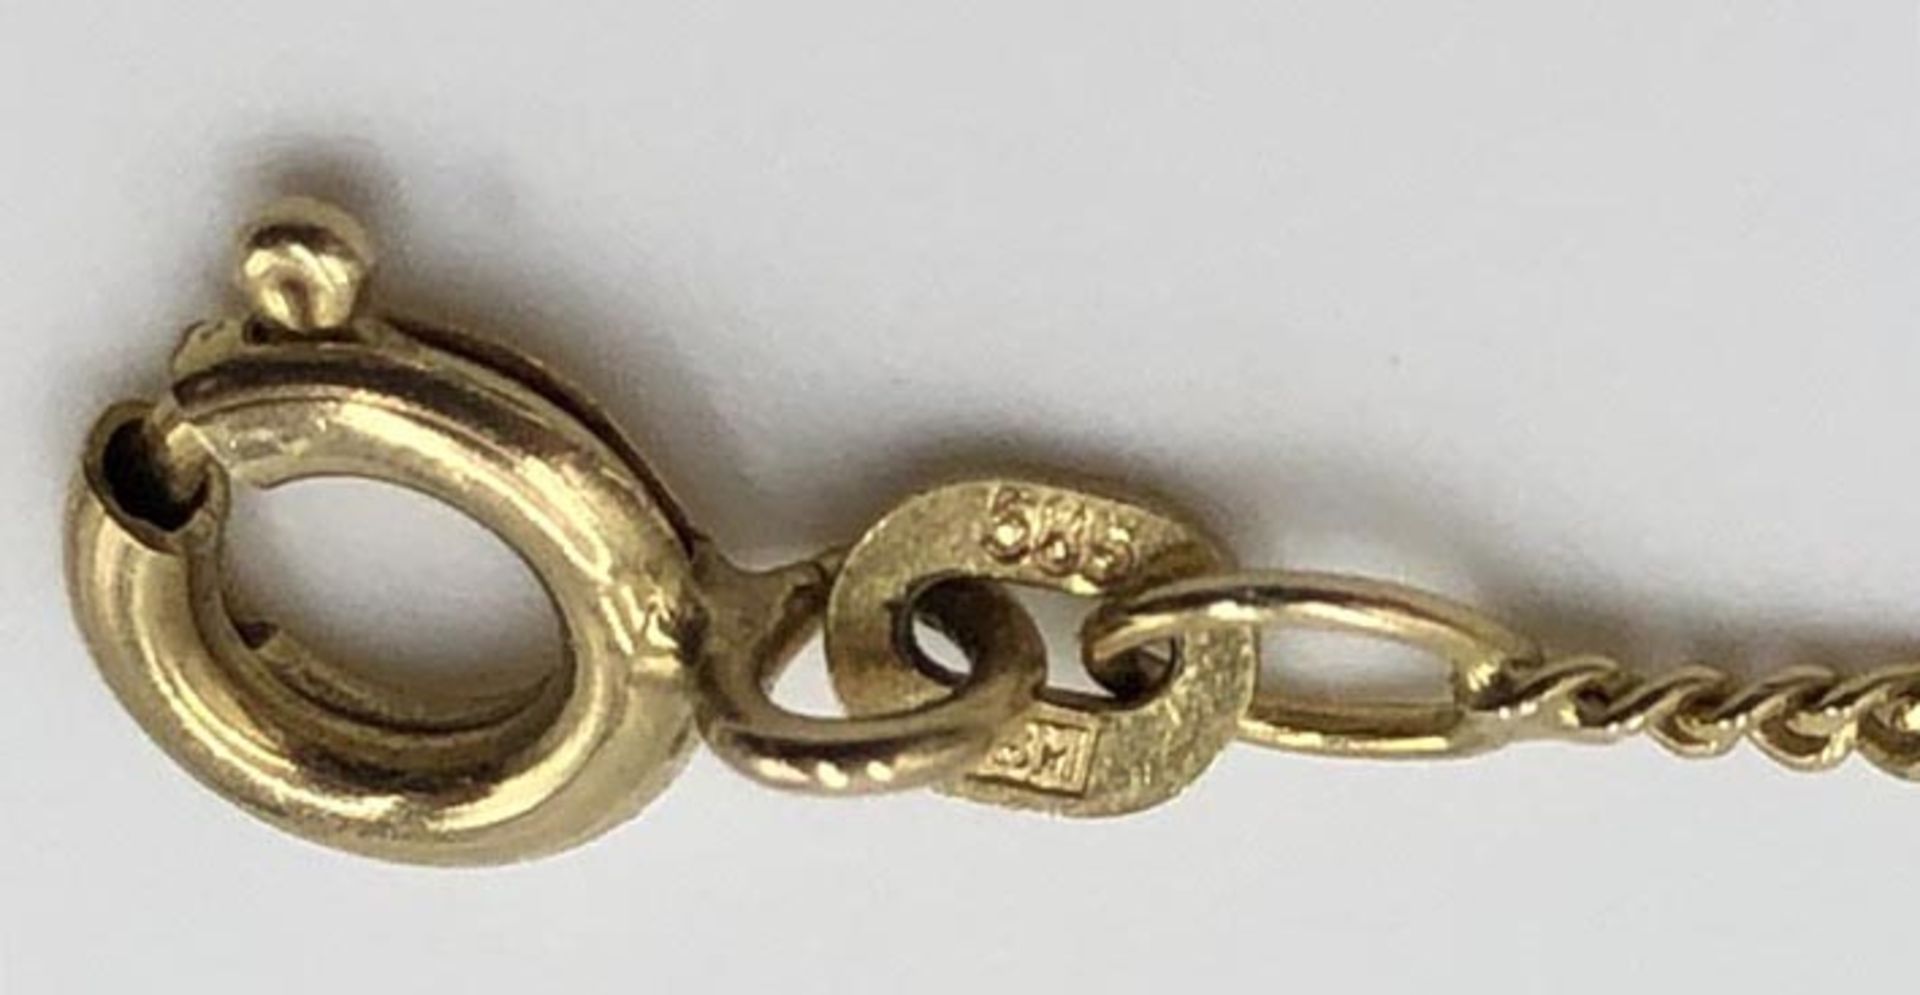 Gold 585 jewelry. See photos.22.3 grams gross. Hallmarks or checked. Partly old collector's jewelry. - Image 3 of 5